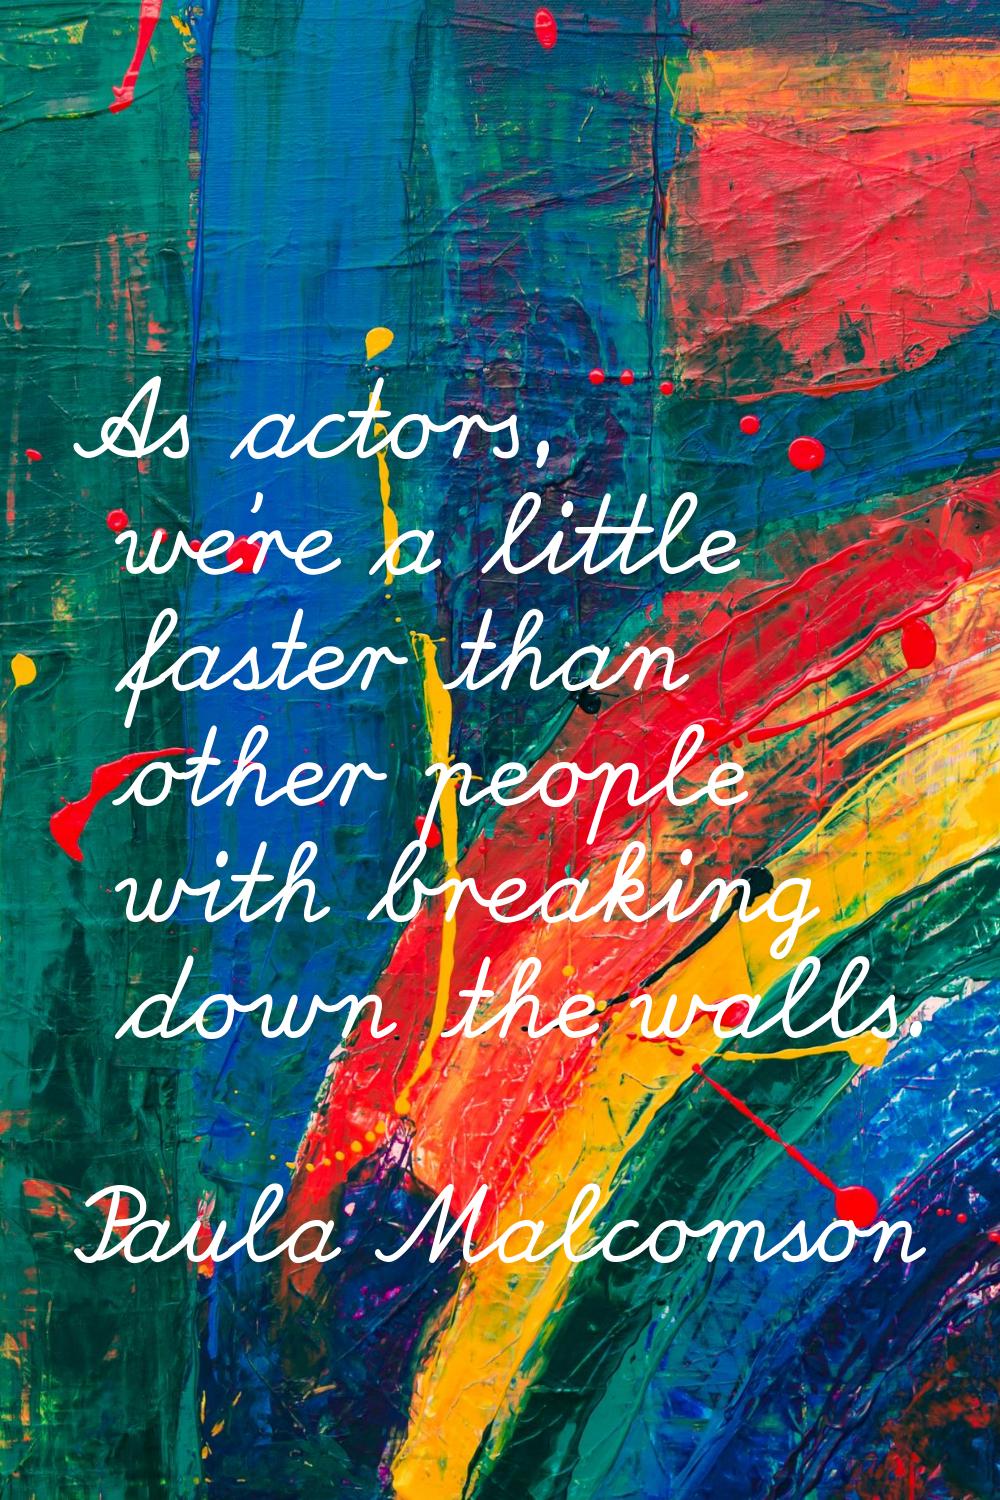 As actors, we're a little faster than other people with breaking down the walls.